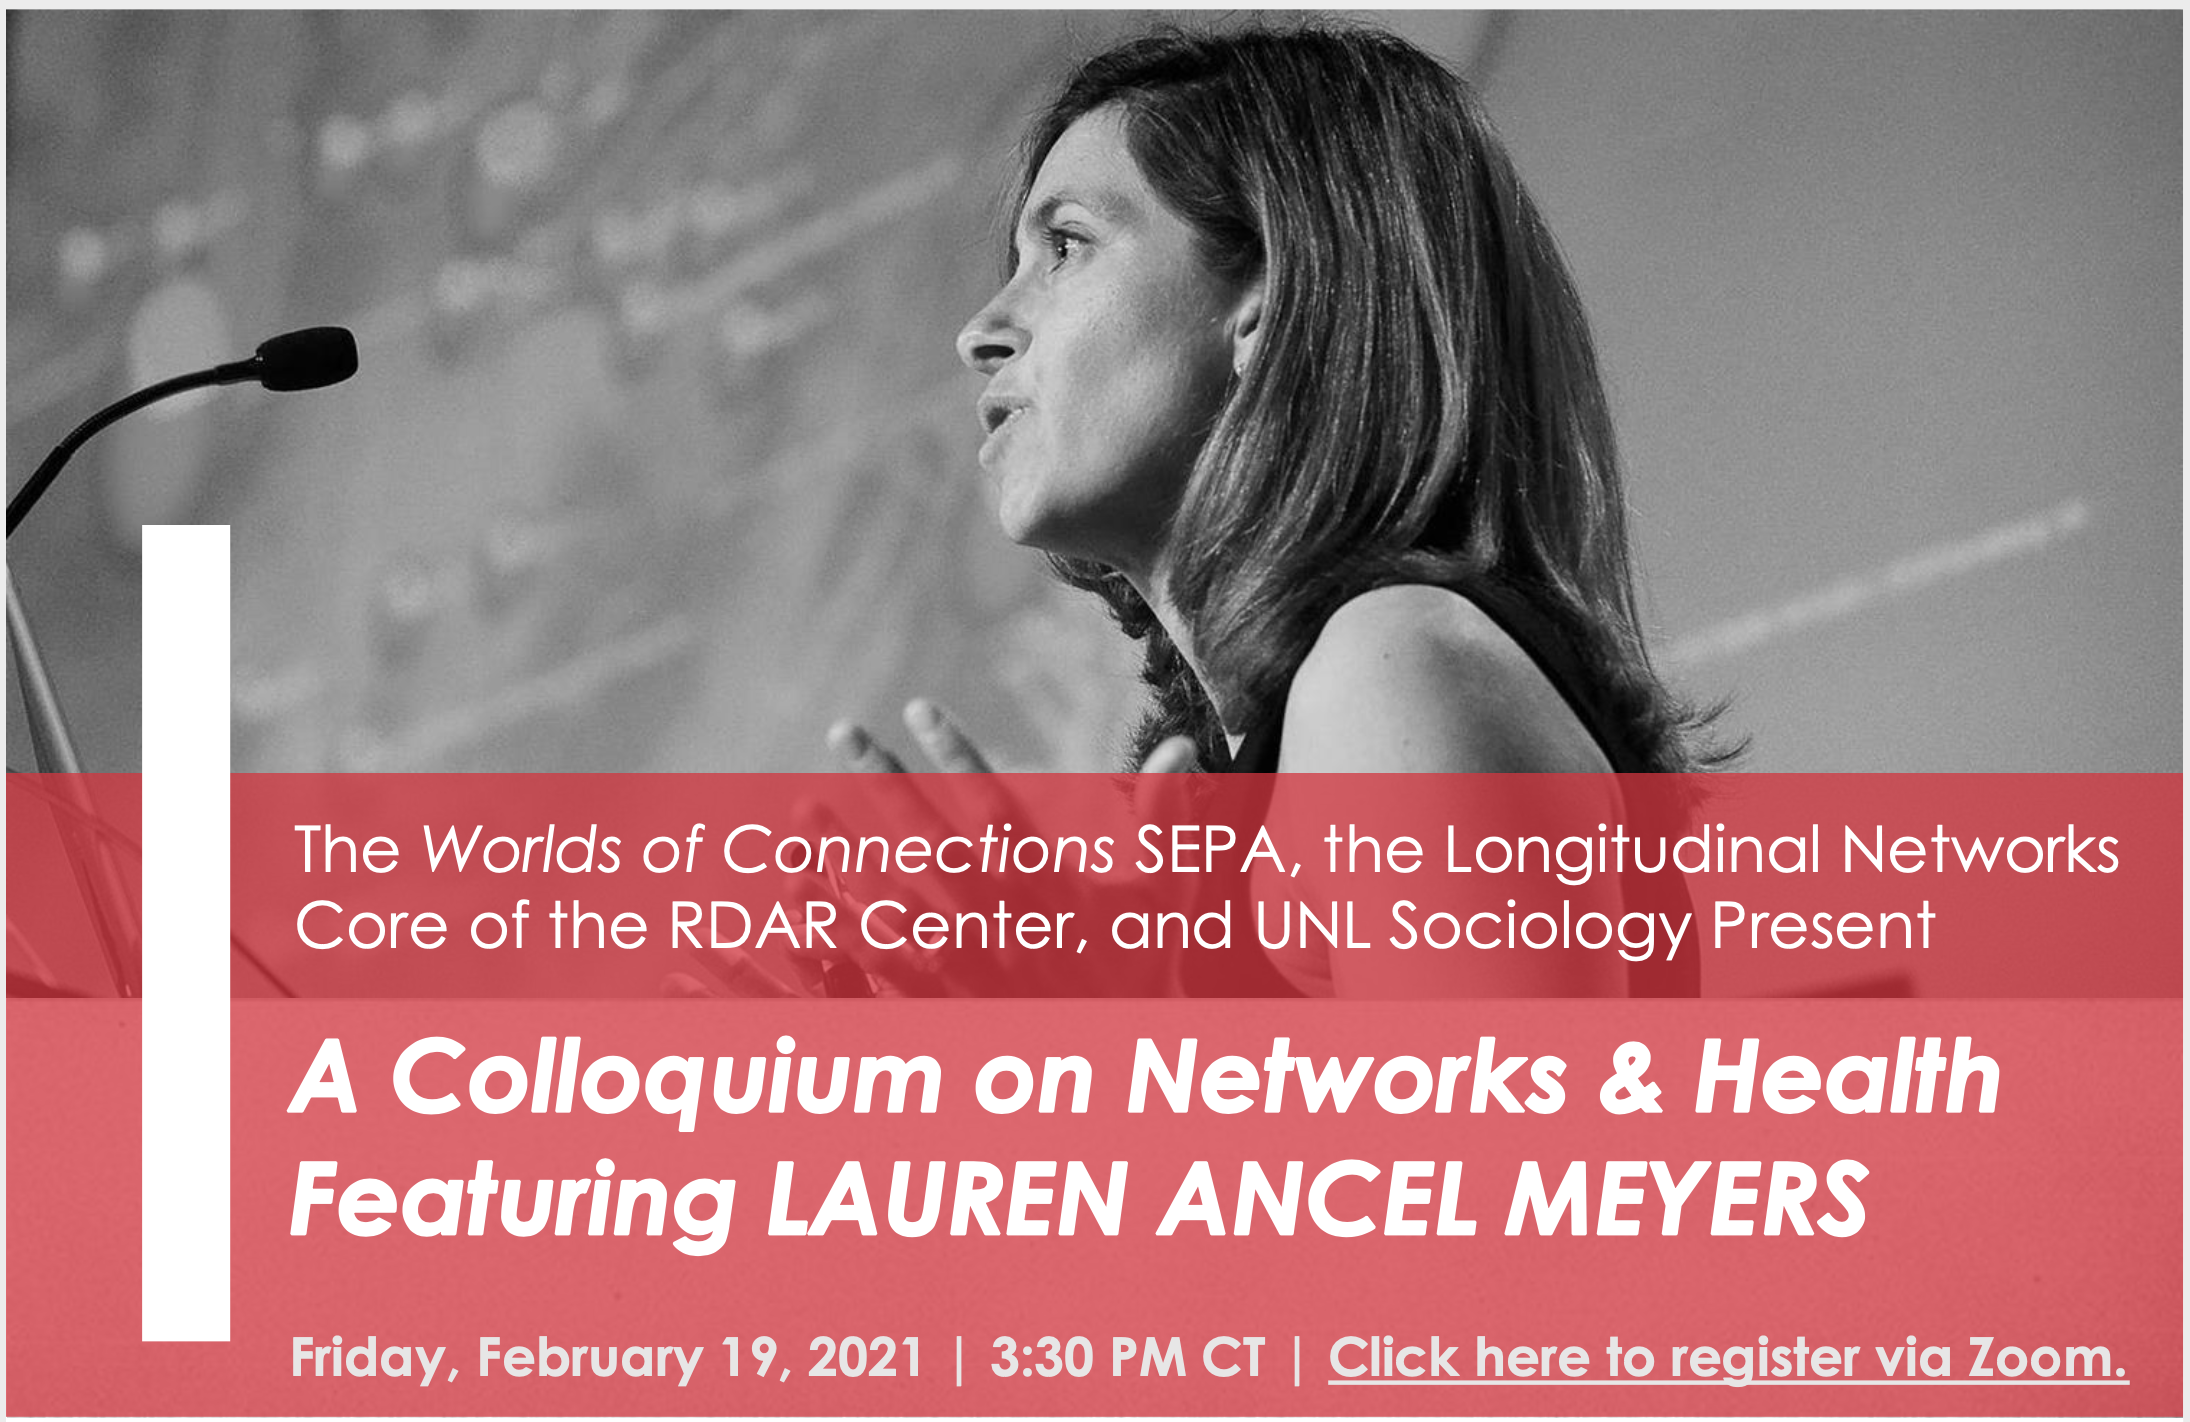 Lauren Ancel Meyers speaking into a microphone in black and white with red overlay and text that reads "SAVE THE DATE. A colloquium on Networks & Health Featuring LAUREN ANCEL MEYERS. Friday, February 19, 2021 | 3:30 PM CT | Click here to register via Zoom."